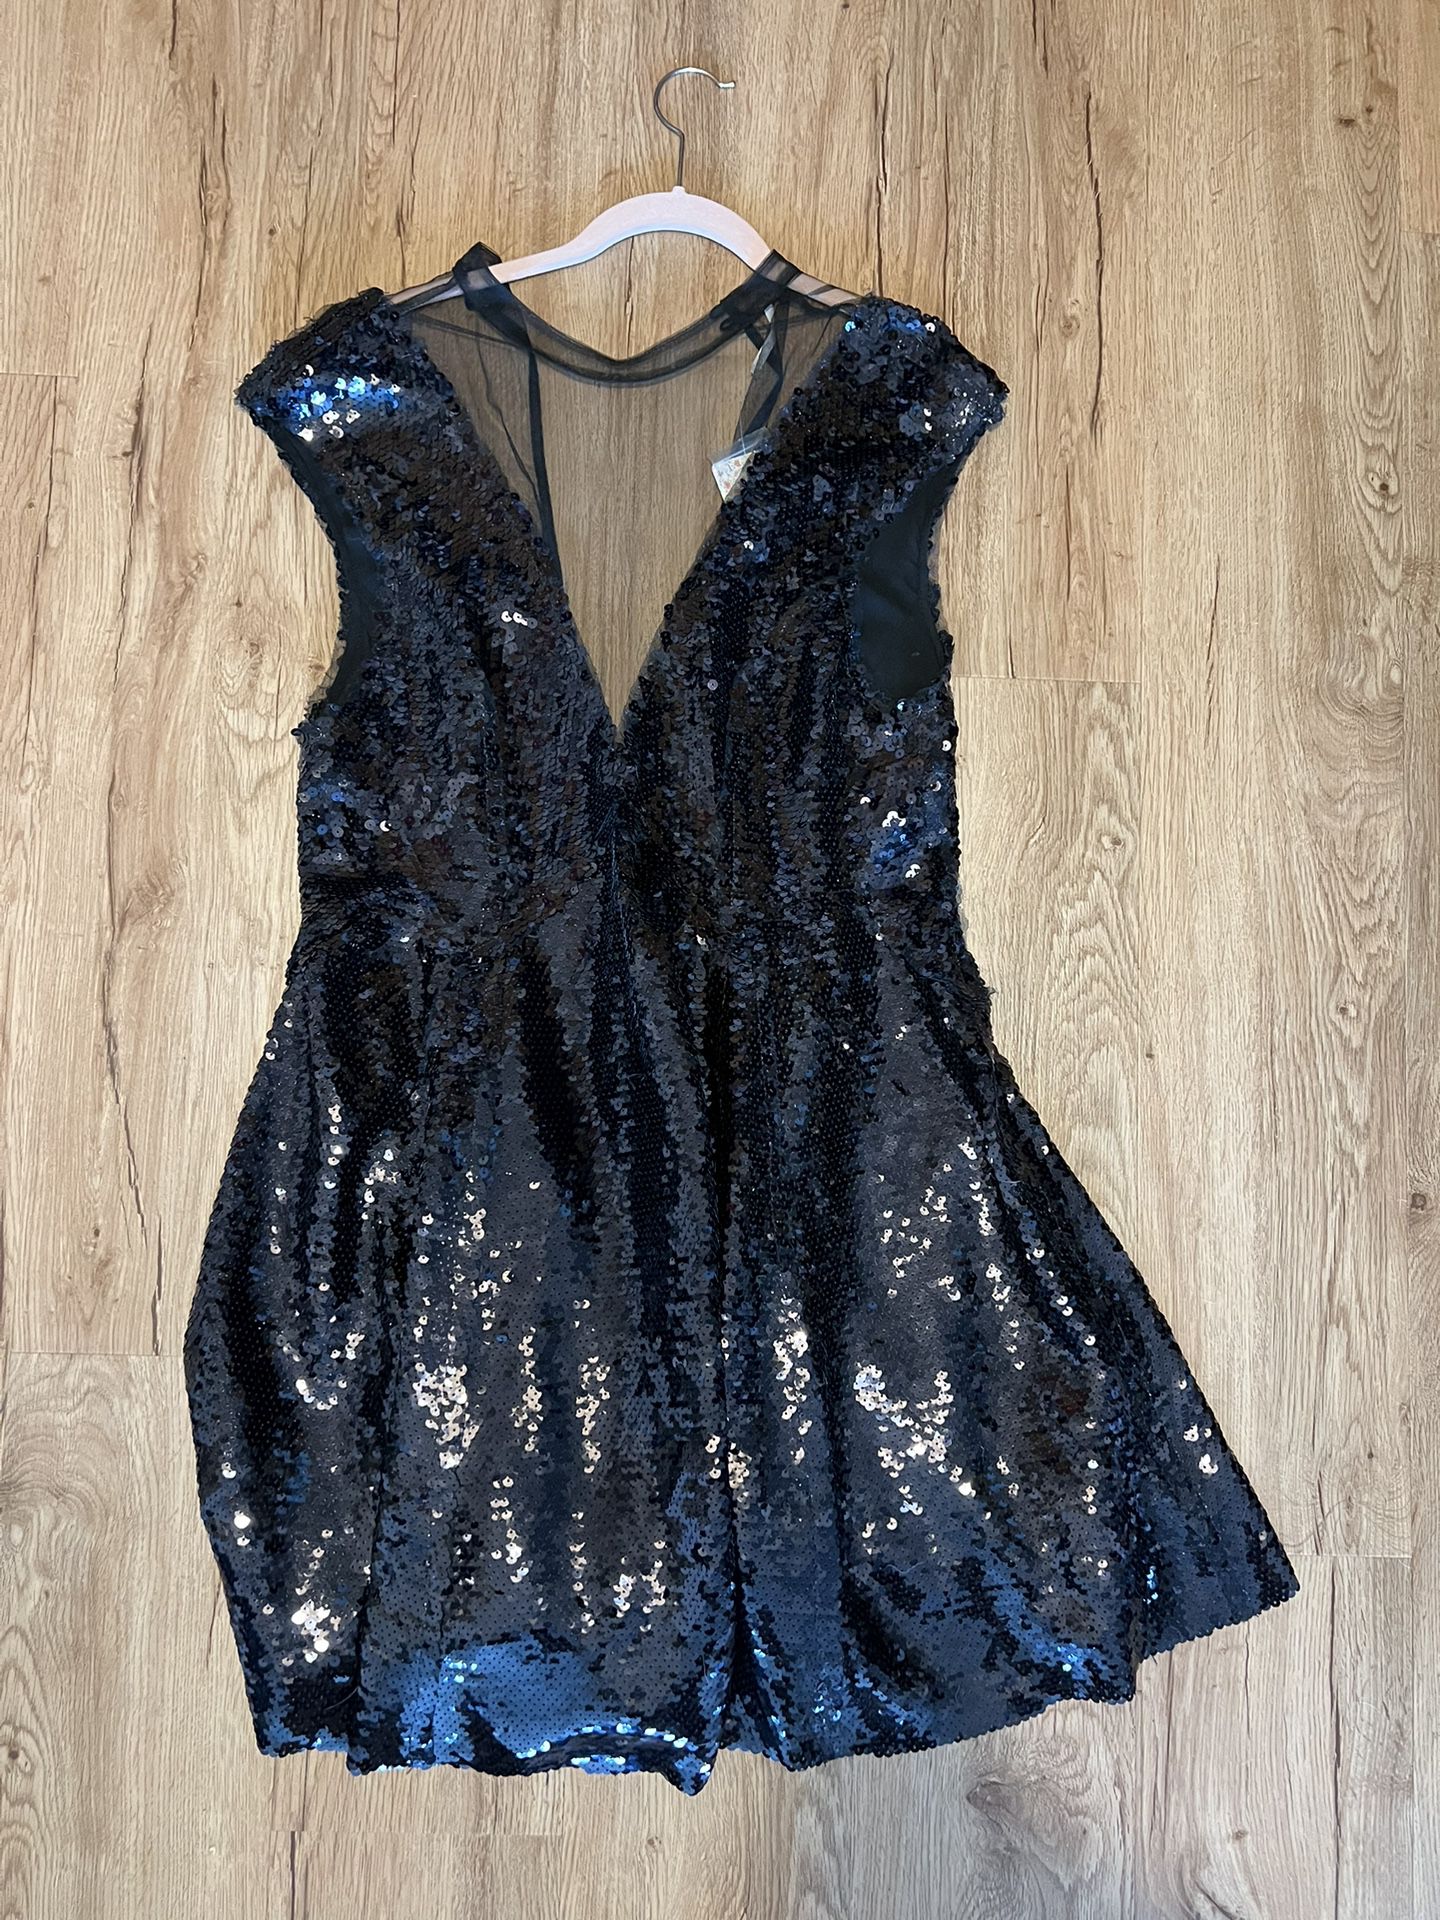 New!!! Free People Sequin Dress, Size Large 